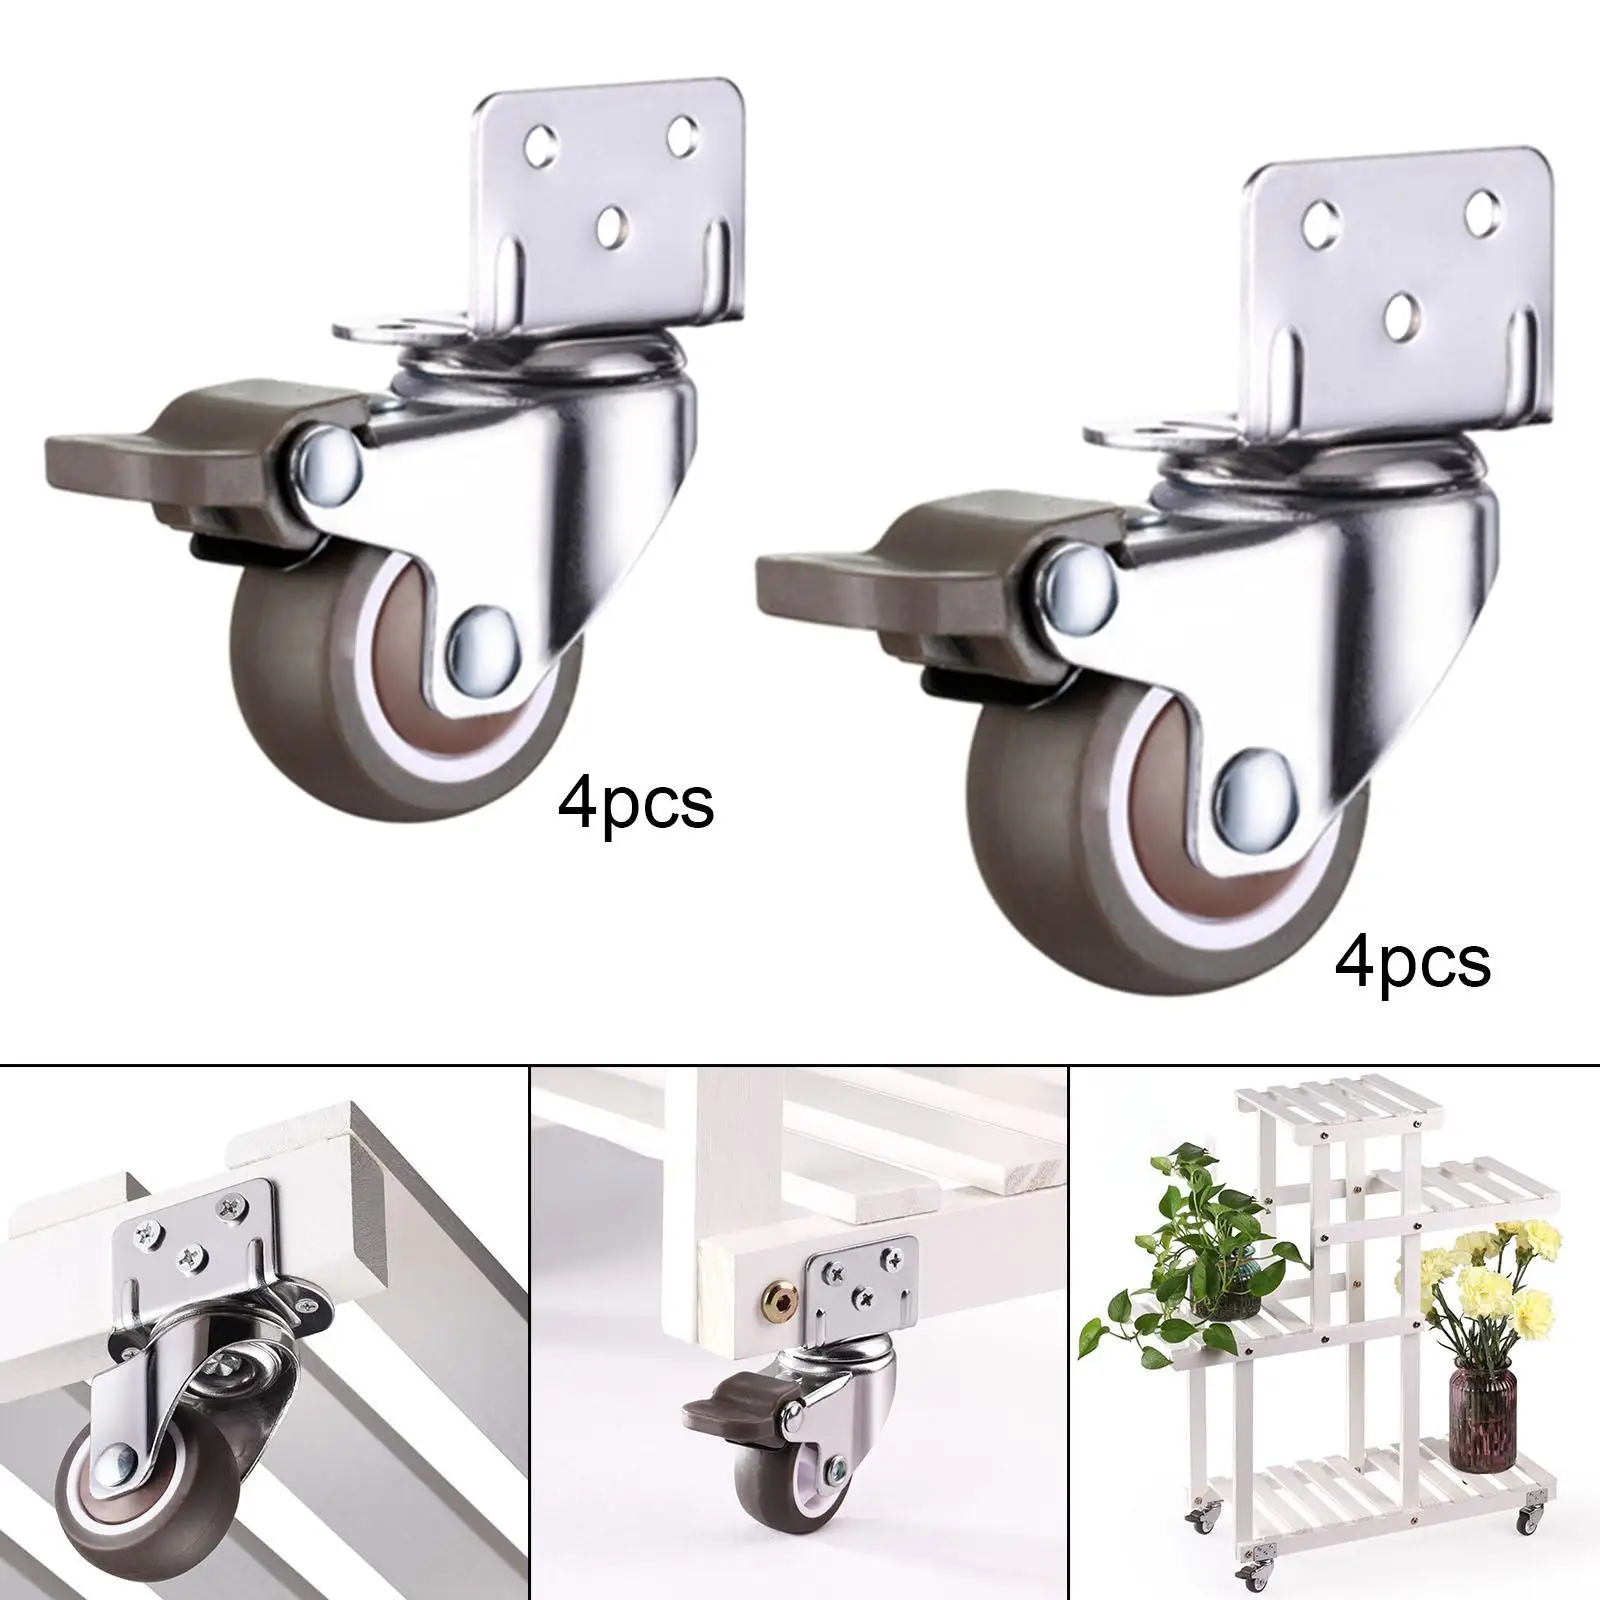 4Pcs L Shaped Plate Swivel Caster Rubber Wheel Mute with Brake Side Mounted for Furniture Carts Trolley Baby Bed Kitchen Cabinet